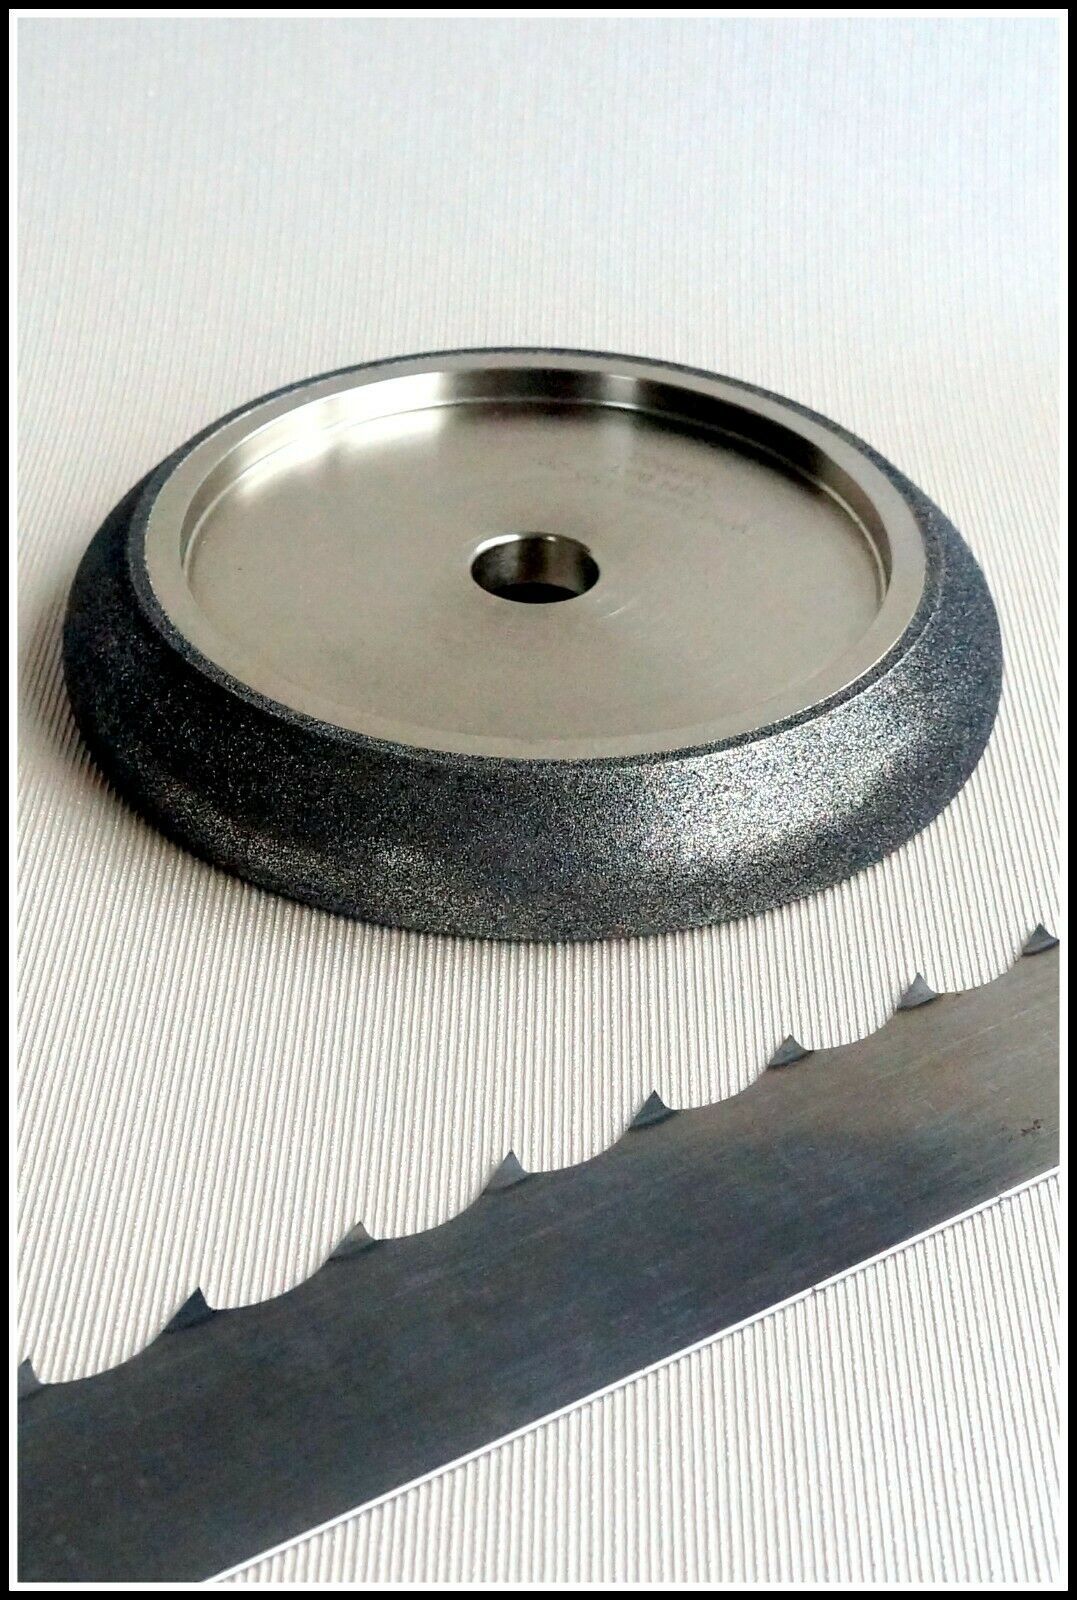 Primary image for BAT Band saw CBN grinding wheel for Lenox Woodmaster bandsaw sharpening disc